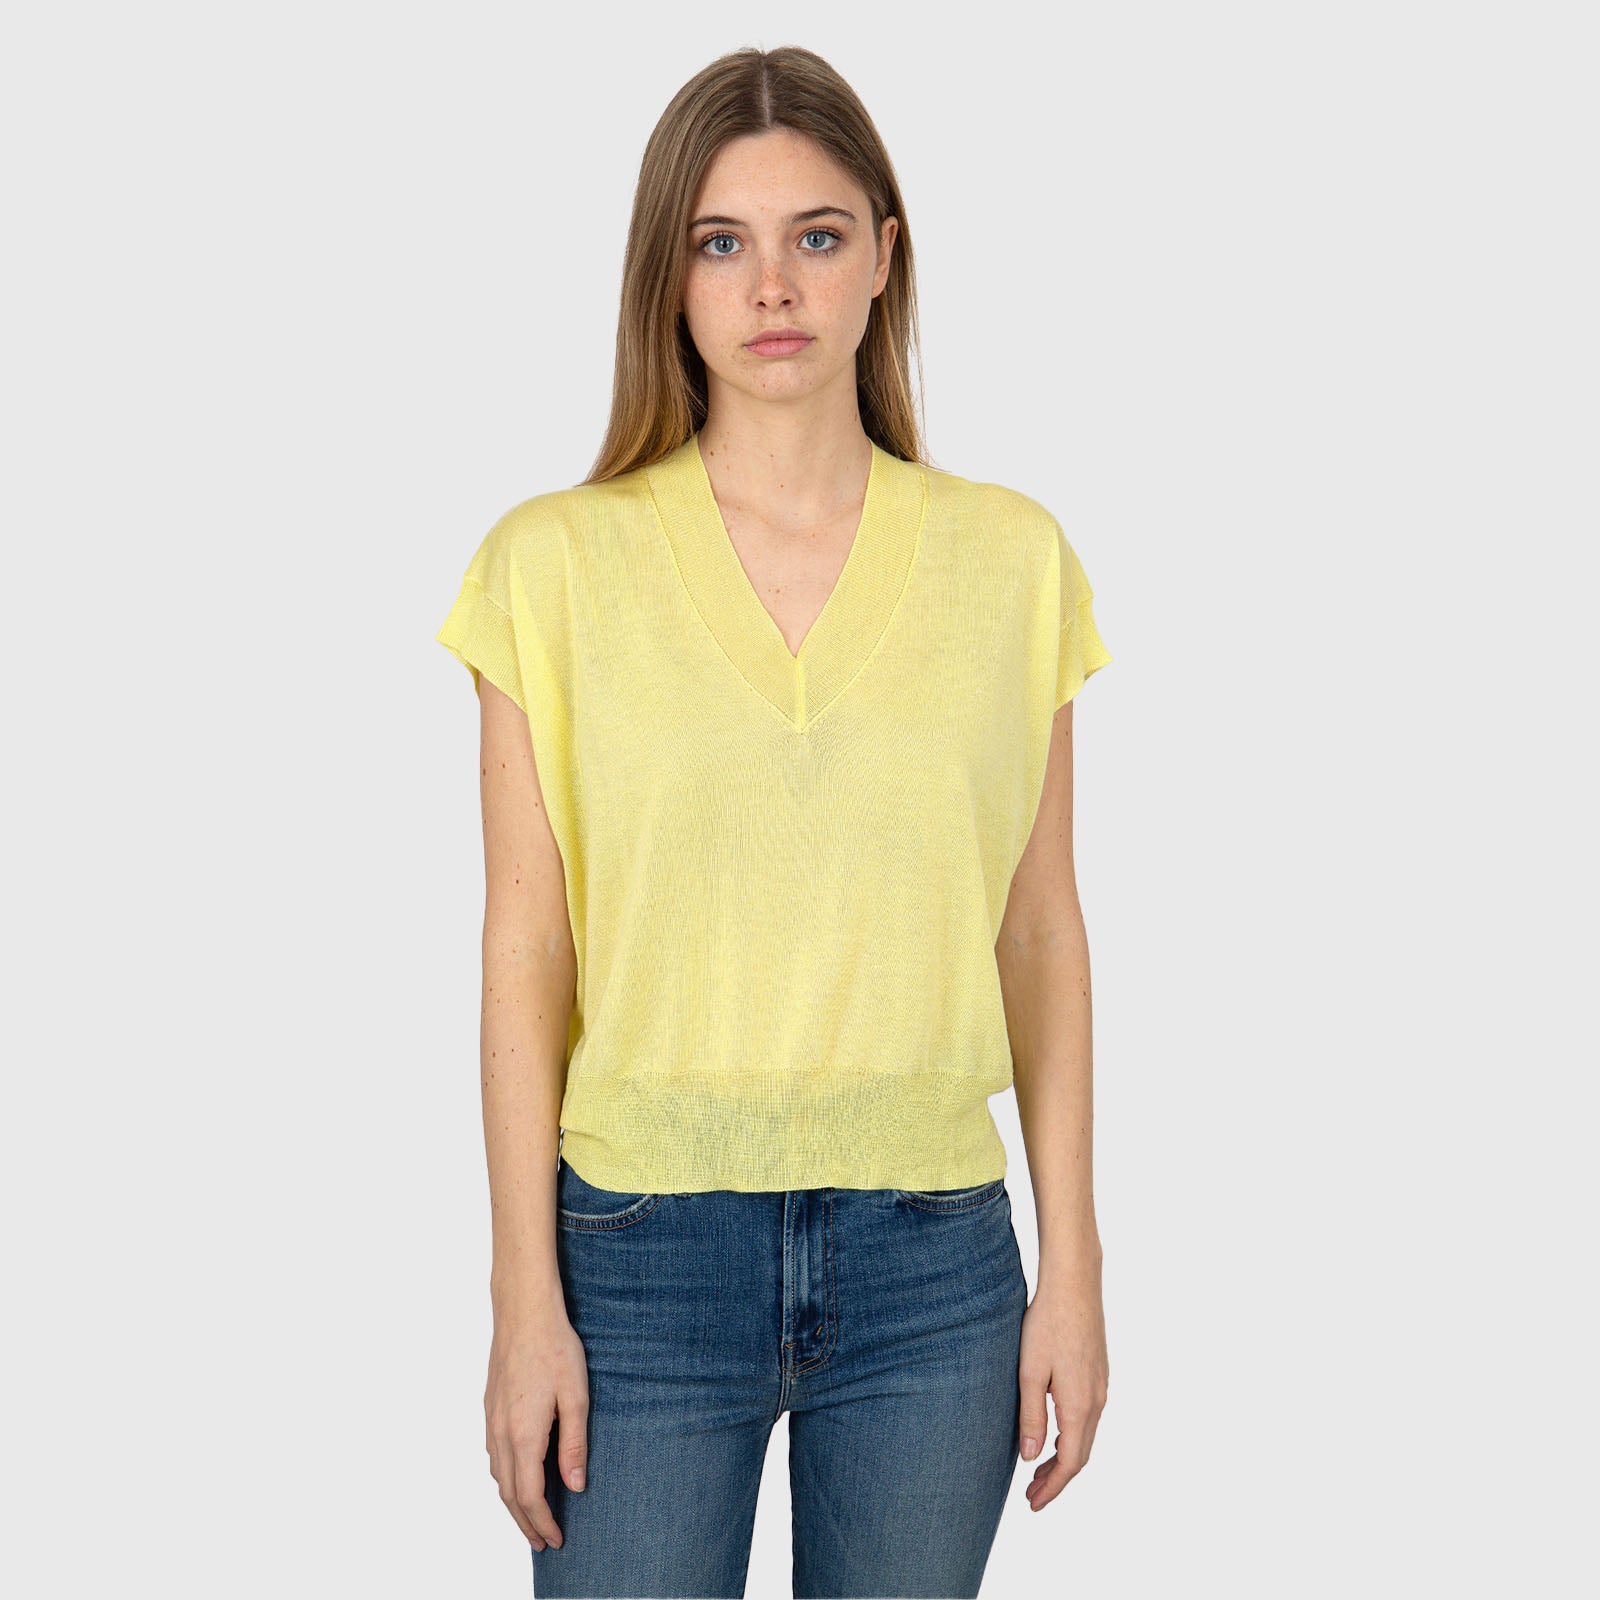 Absolut Cashmere Blair Synthetic Yellow Sweater - 6